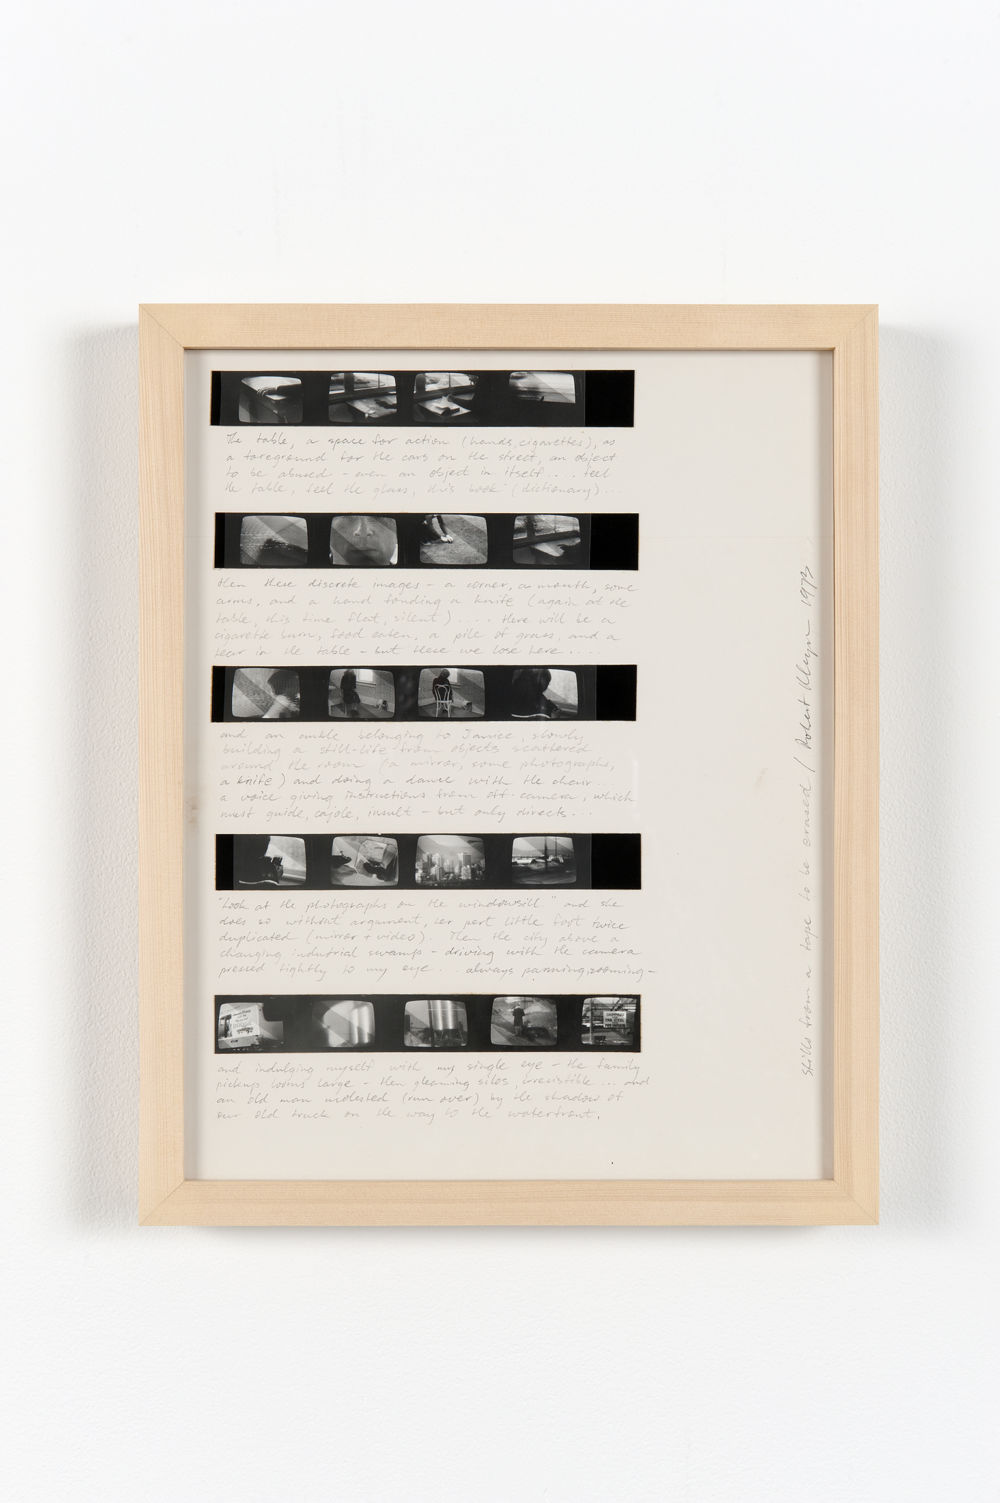 ​Robert Kleyn, Stills From a Tape to be Erased, 1973, black and white photographs and pencil on paper, 15 x 12 in. (39 x 31 cm) by 